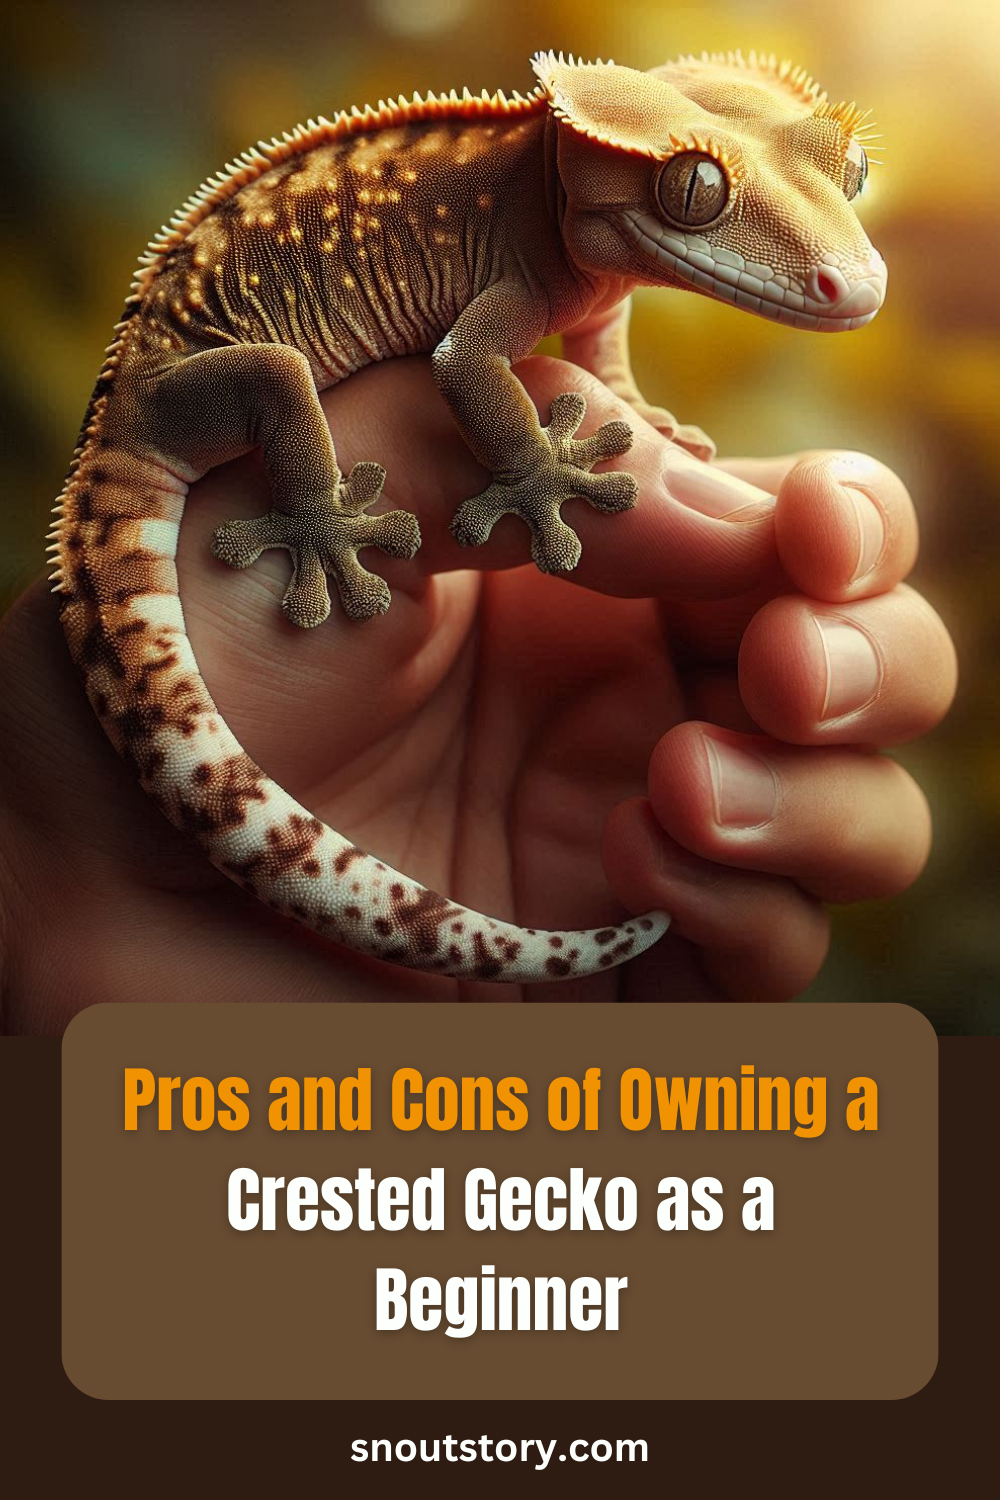 Pros And Cons Of Owning A Crested Gecko – Everything You Need To Know